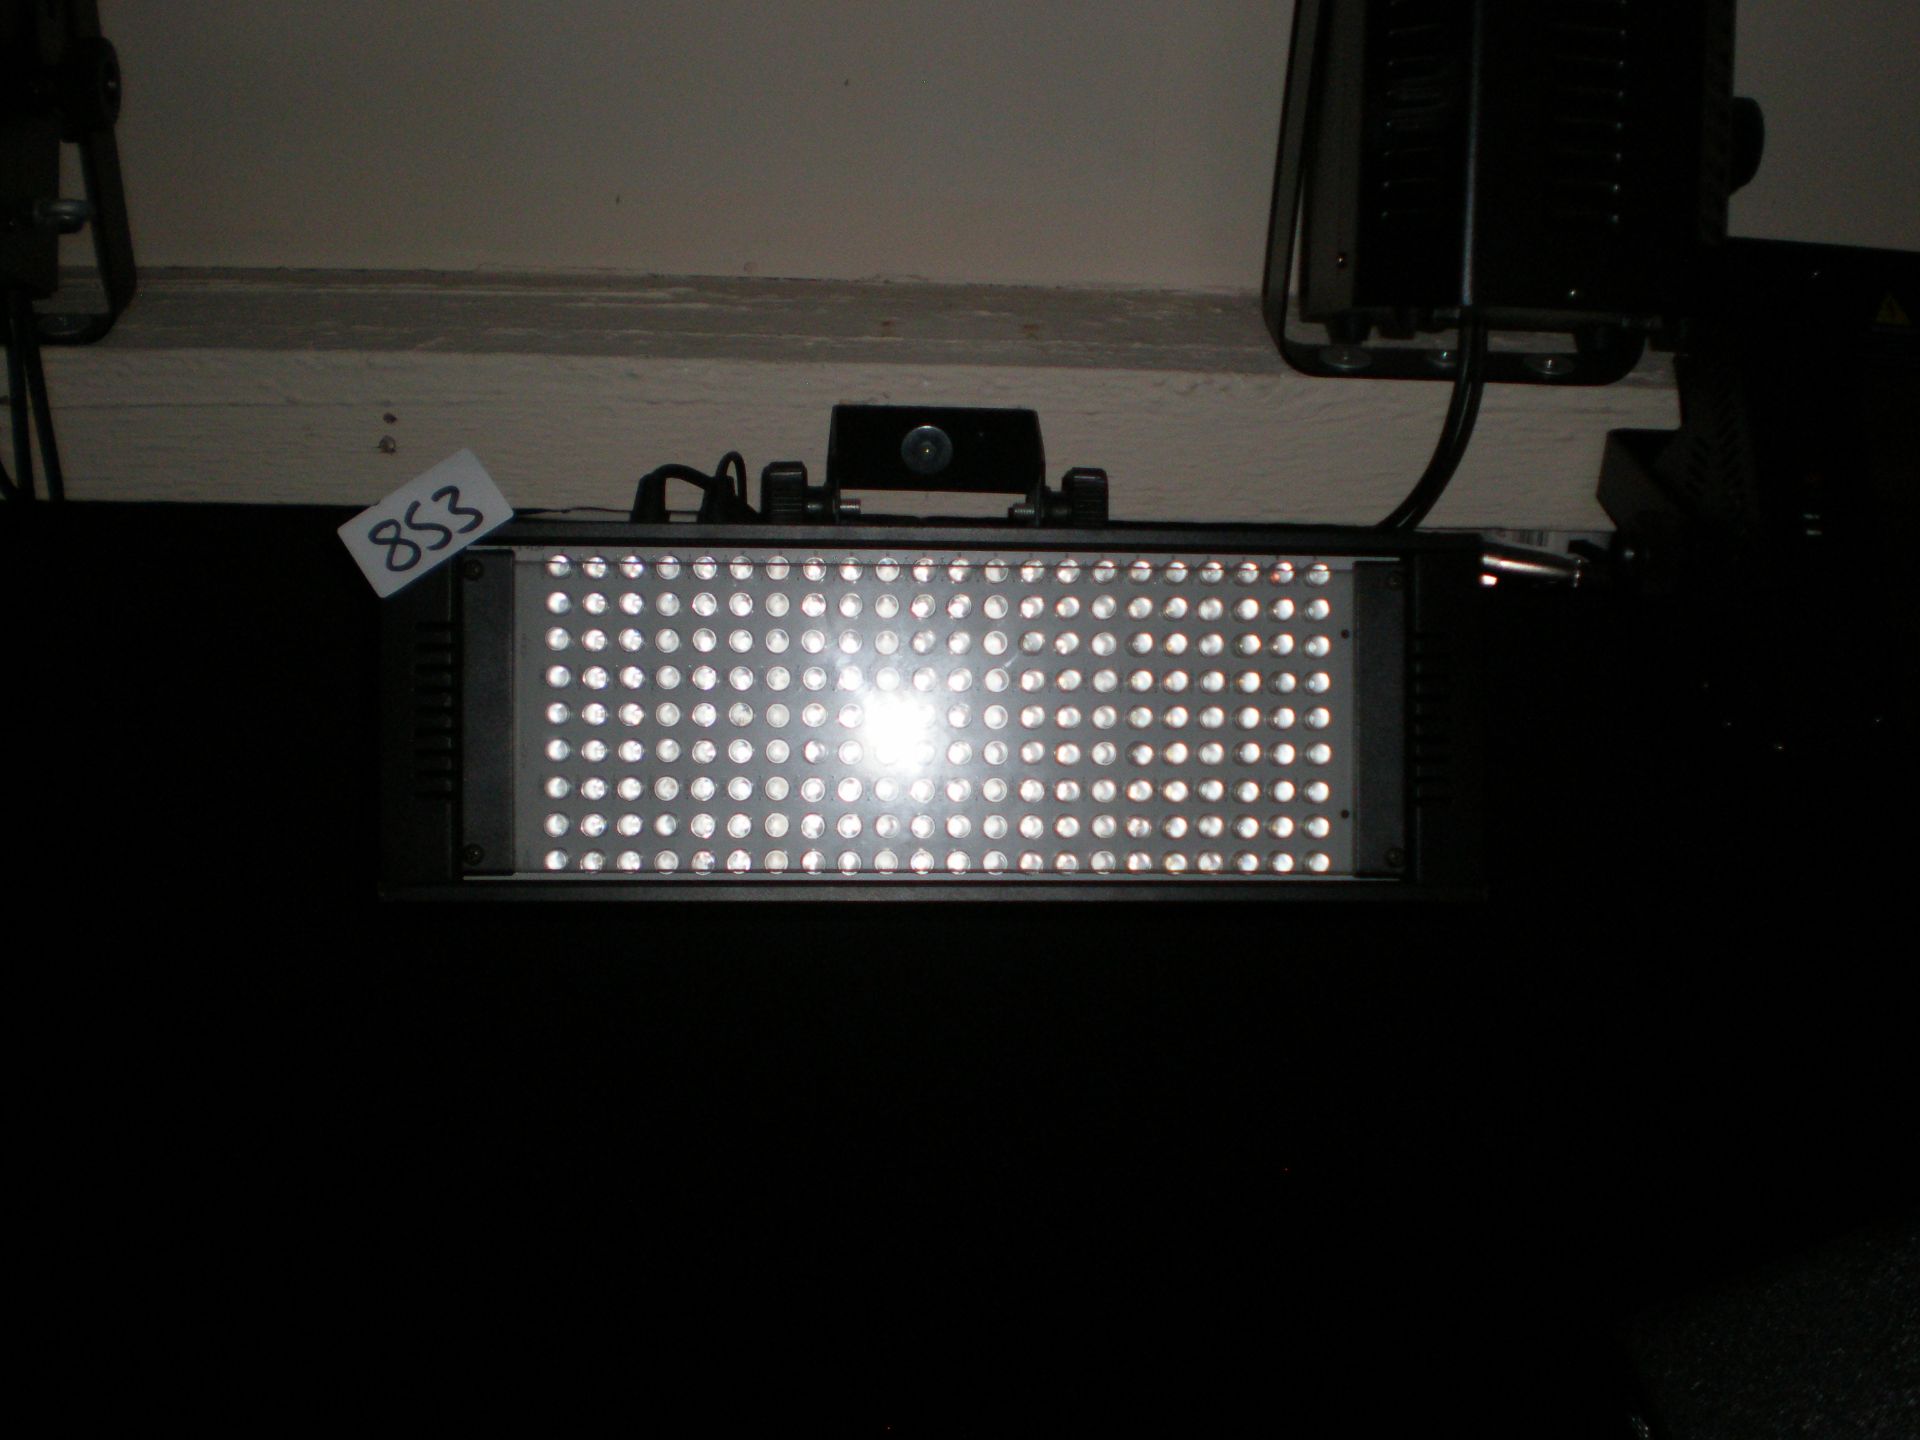 Rgb Colour Strobe Light /Blinder Dmx Or Master Slave Or Stand Alone Operation, Comes Wih Mounting